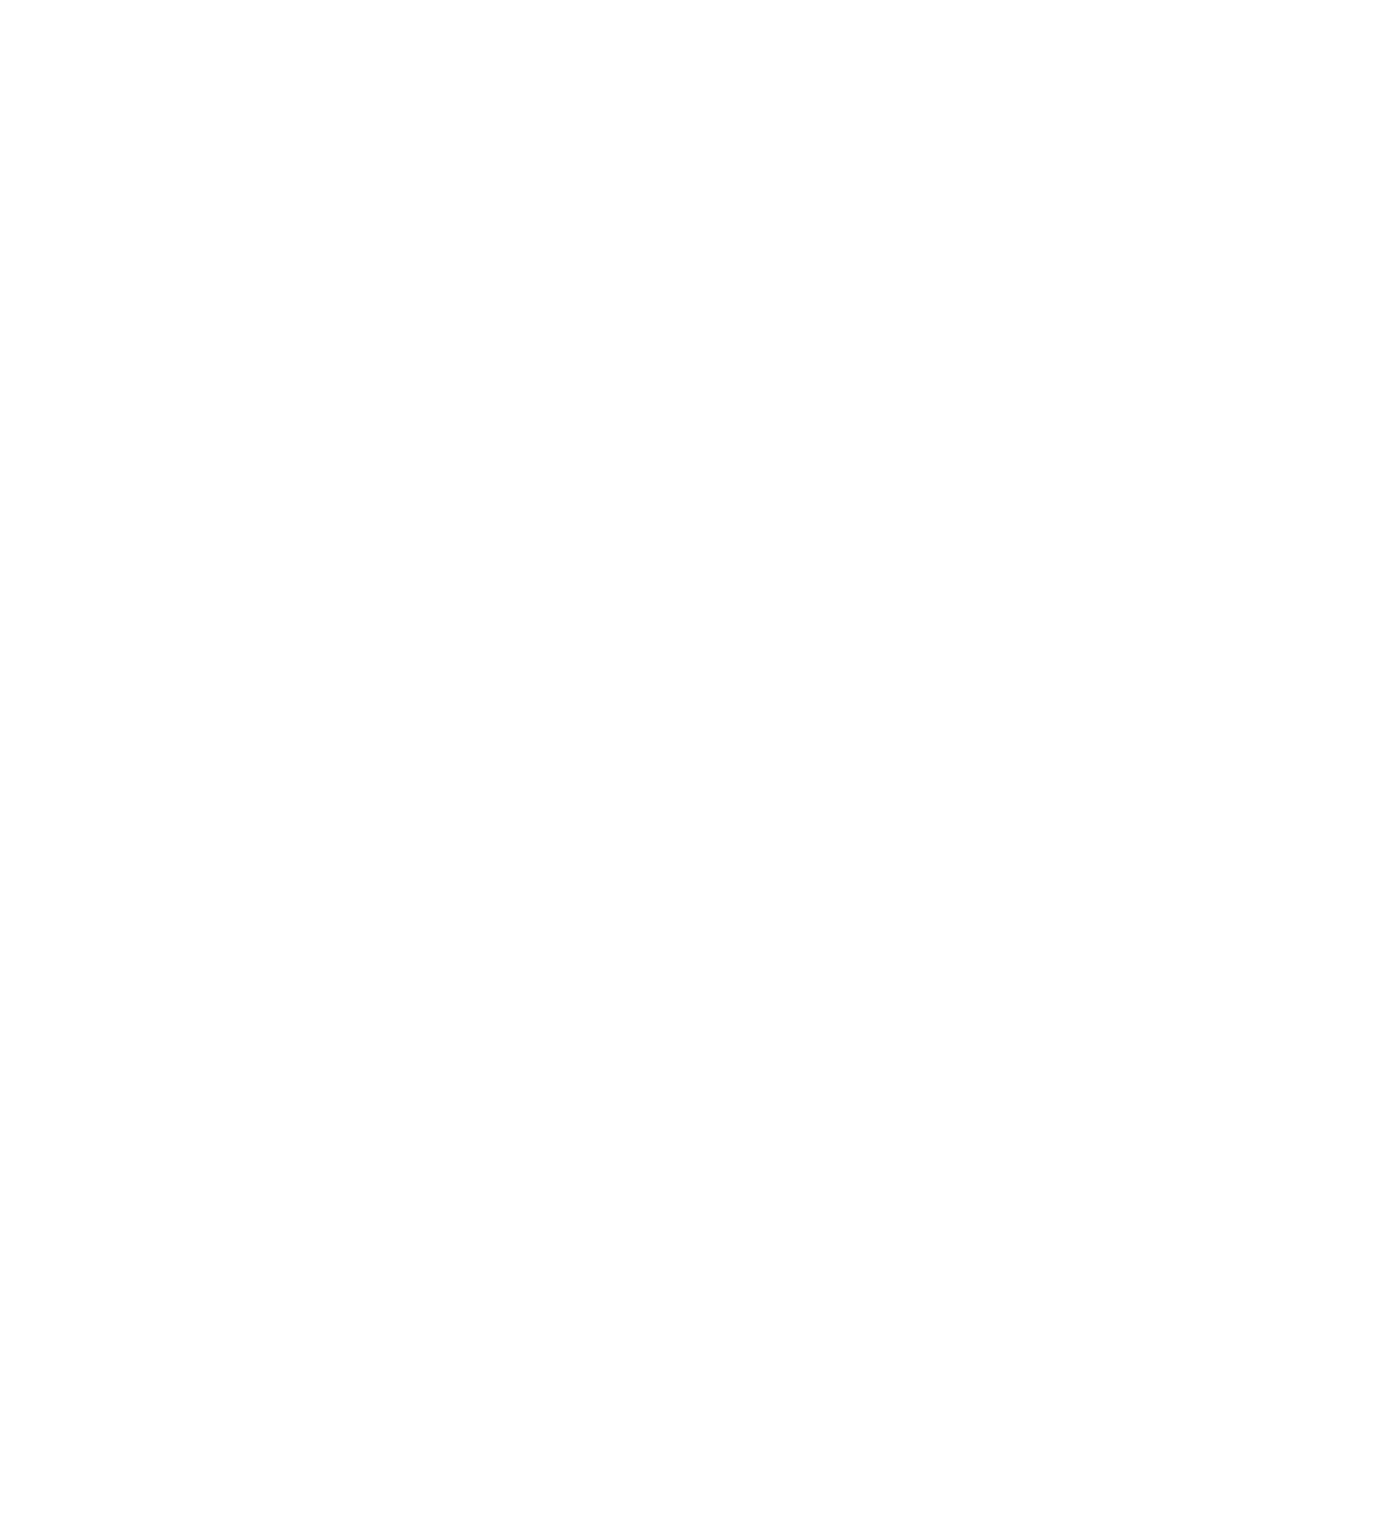 h Space MOVEMENT